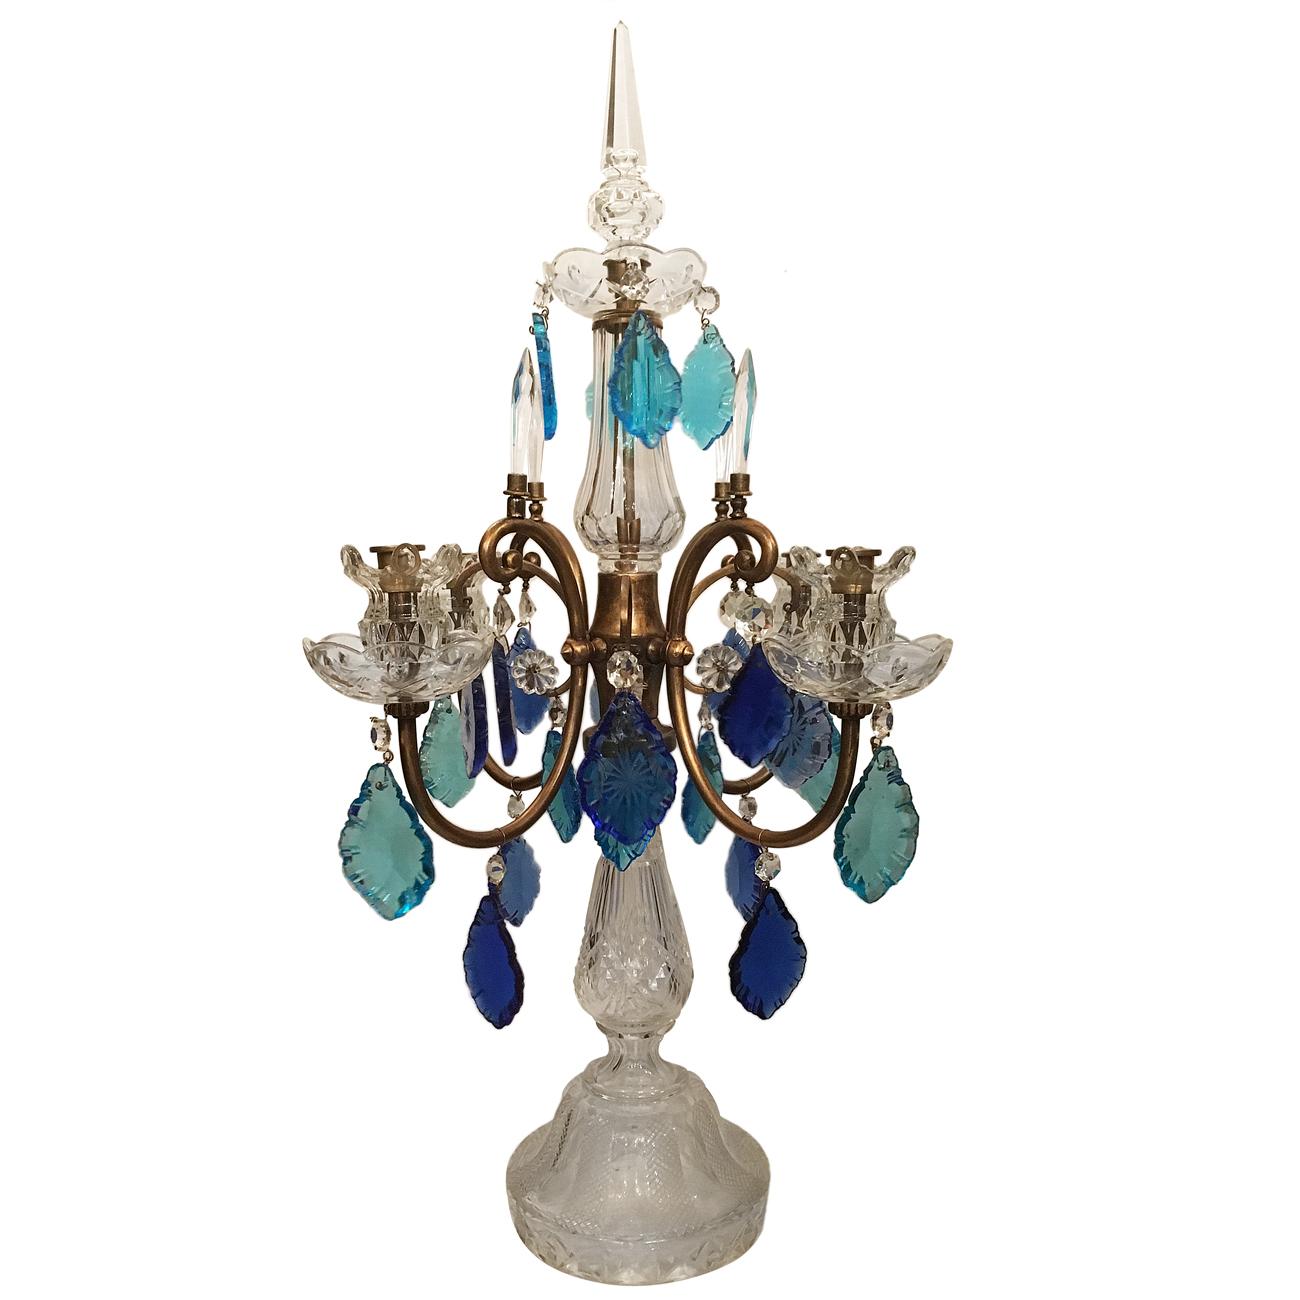 A French cut crystal candelabra with blue pendants in light and darker tones, circa 1930.